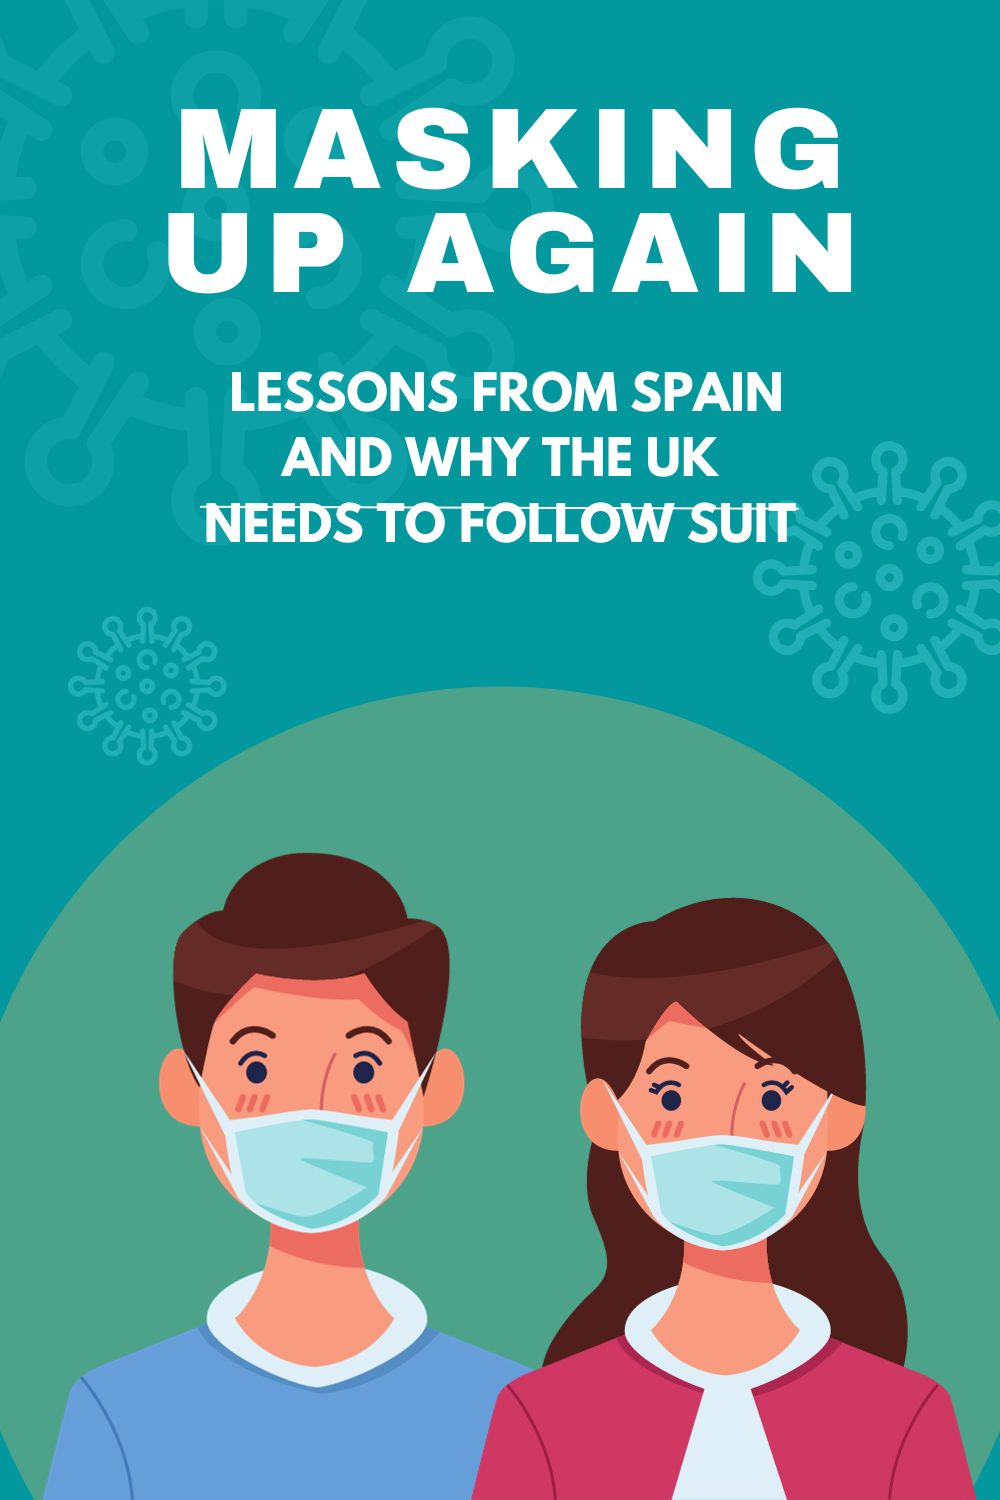 Spain's proactive approach to COVID-19 and flu includes masking mandates, emphasizing public health, and offering key insights for the UK to learn from.